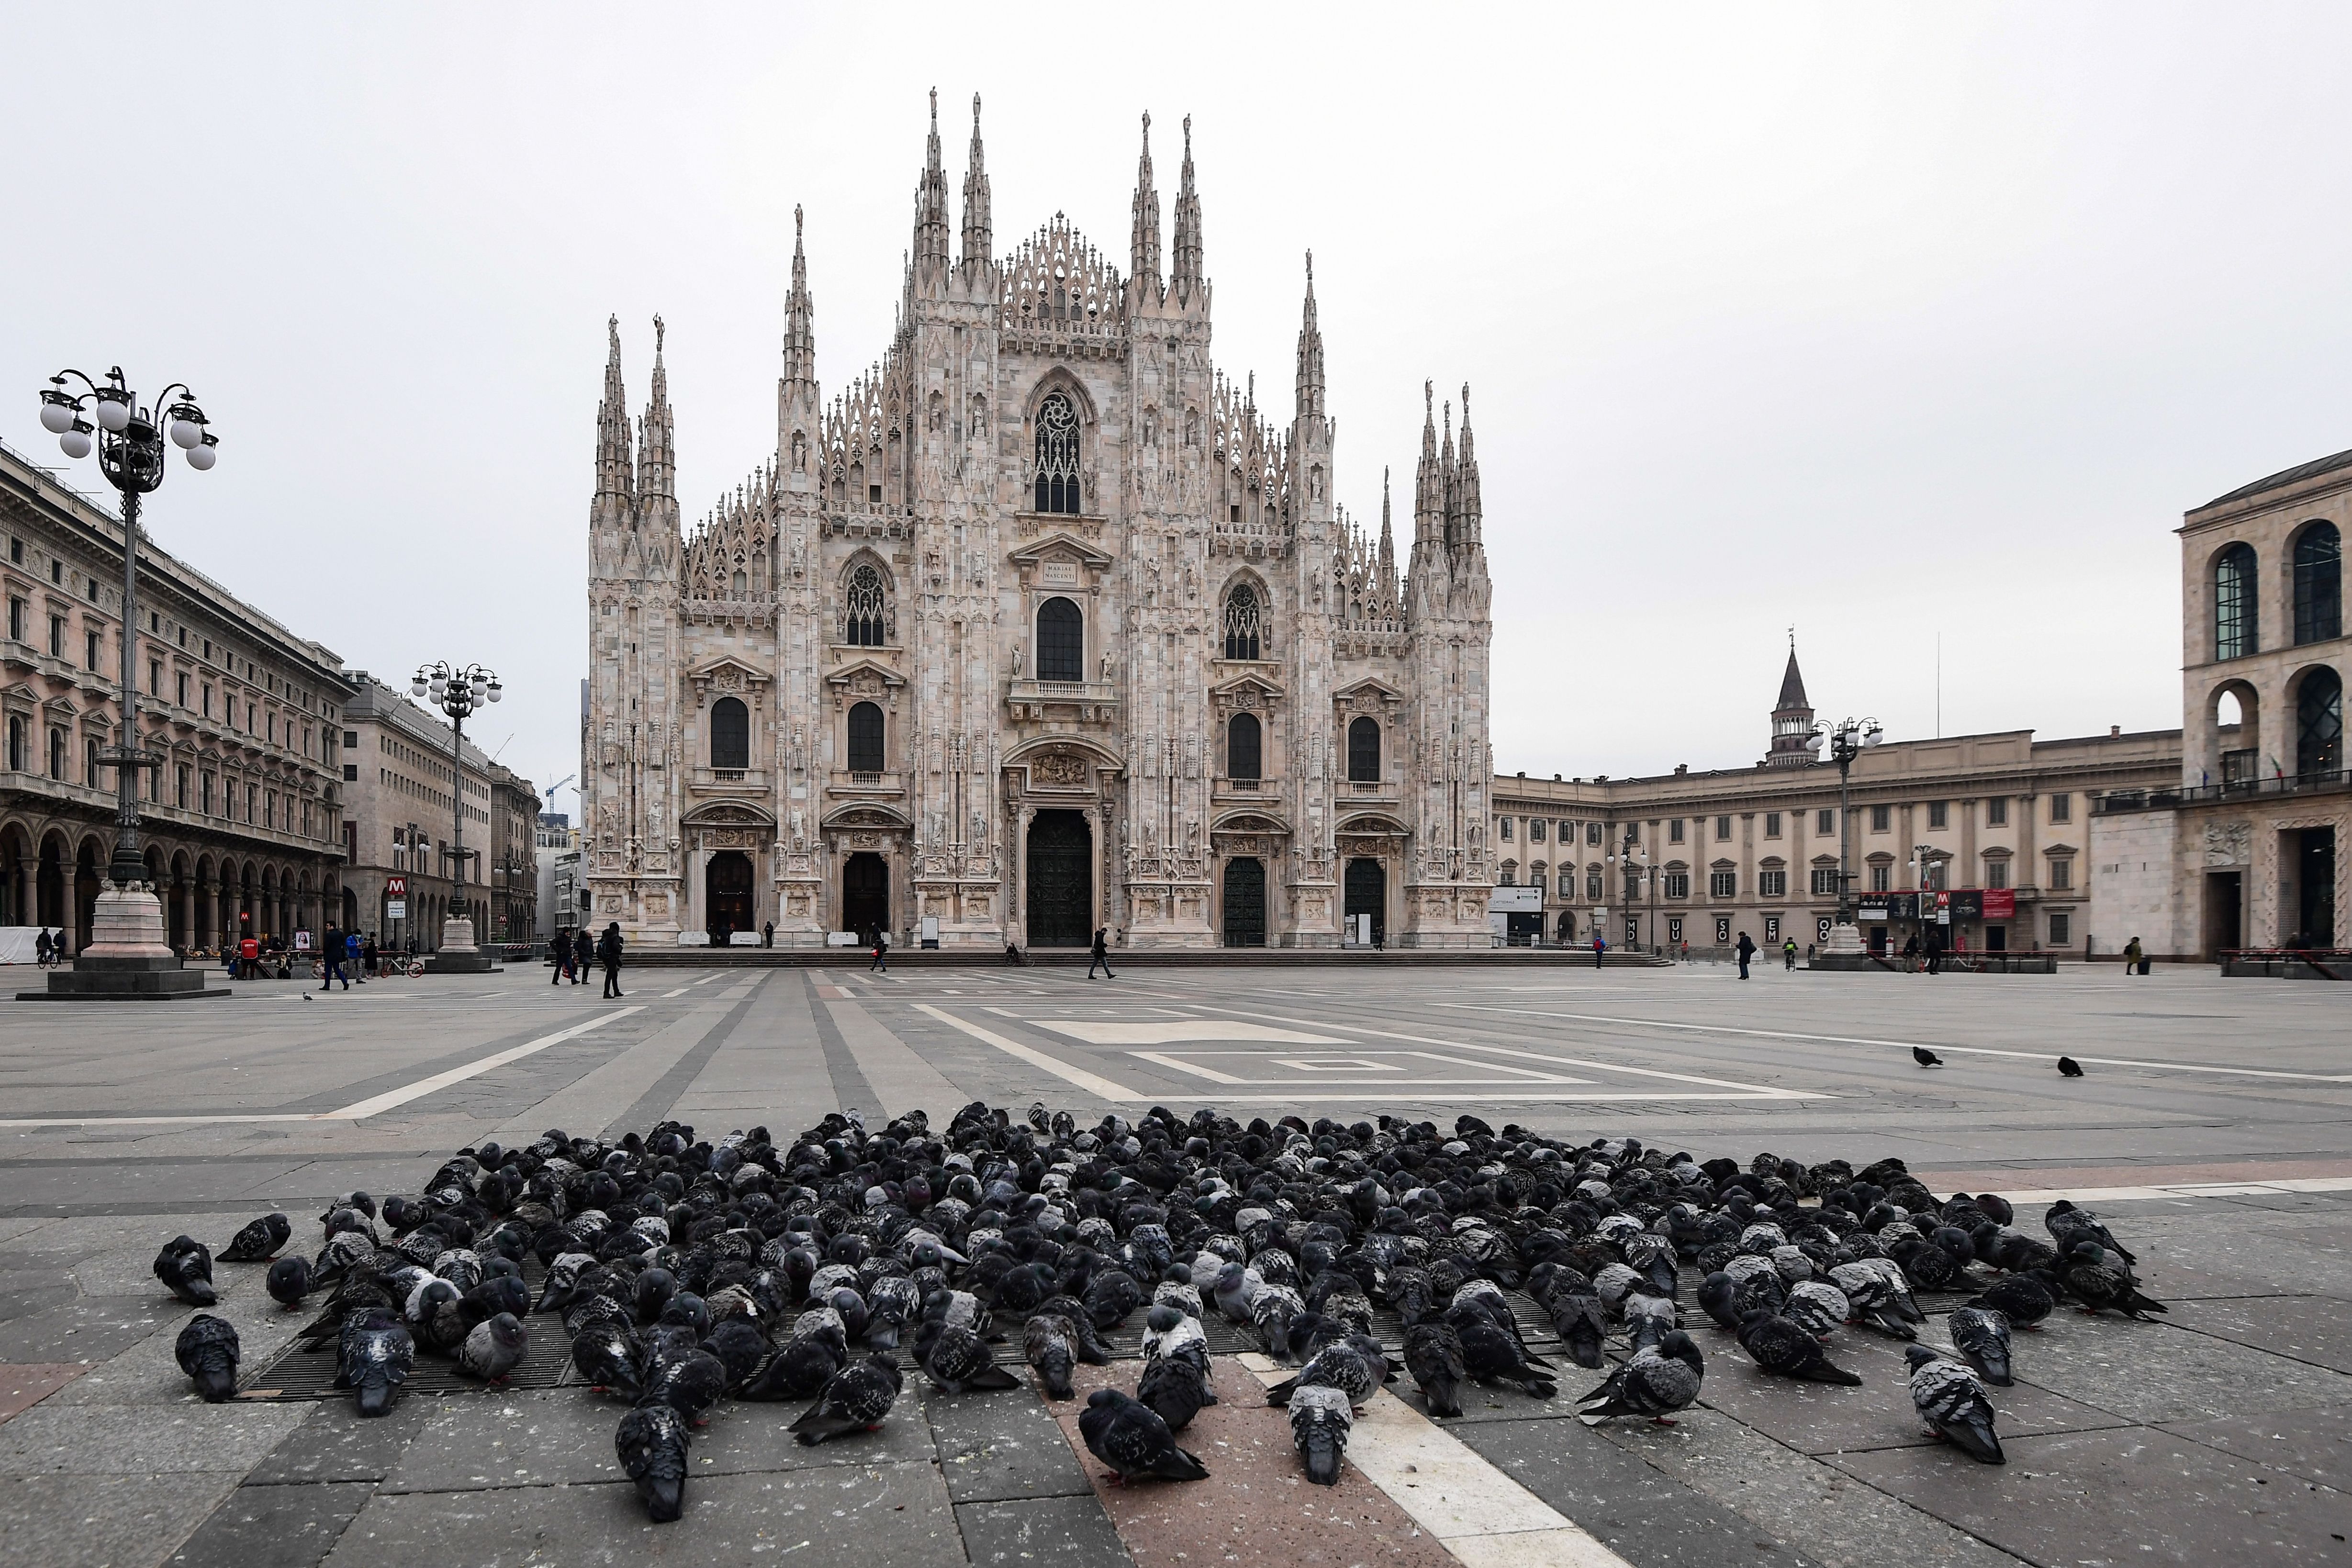 Pigeons gather on Piazza del Duomo by Milan's cathedral on March 10, 2020 in Milan. (Photo by MIGUEL MEDINA/AFP via Getty Images)